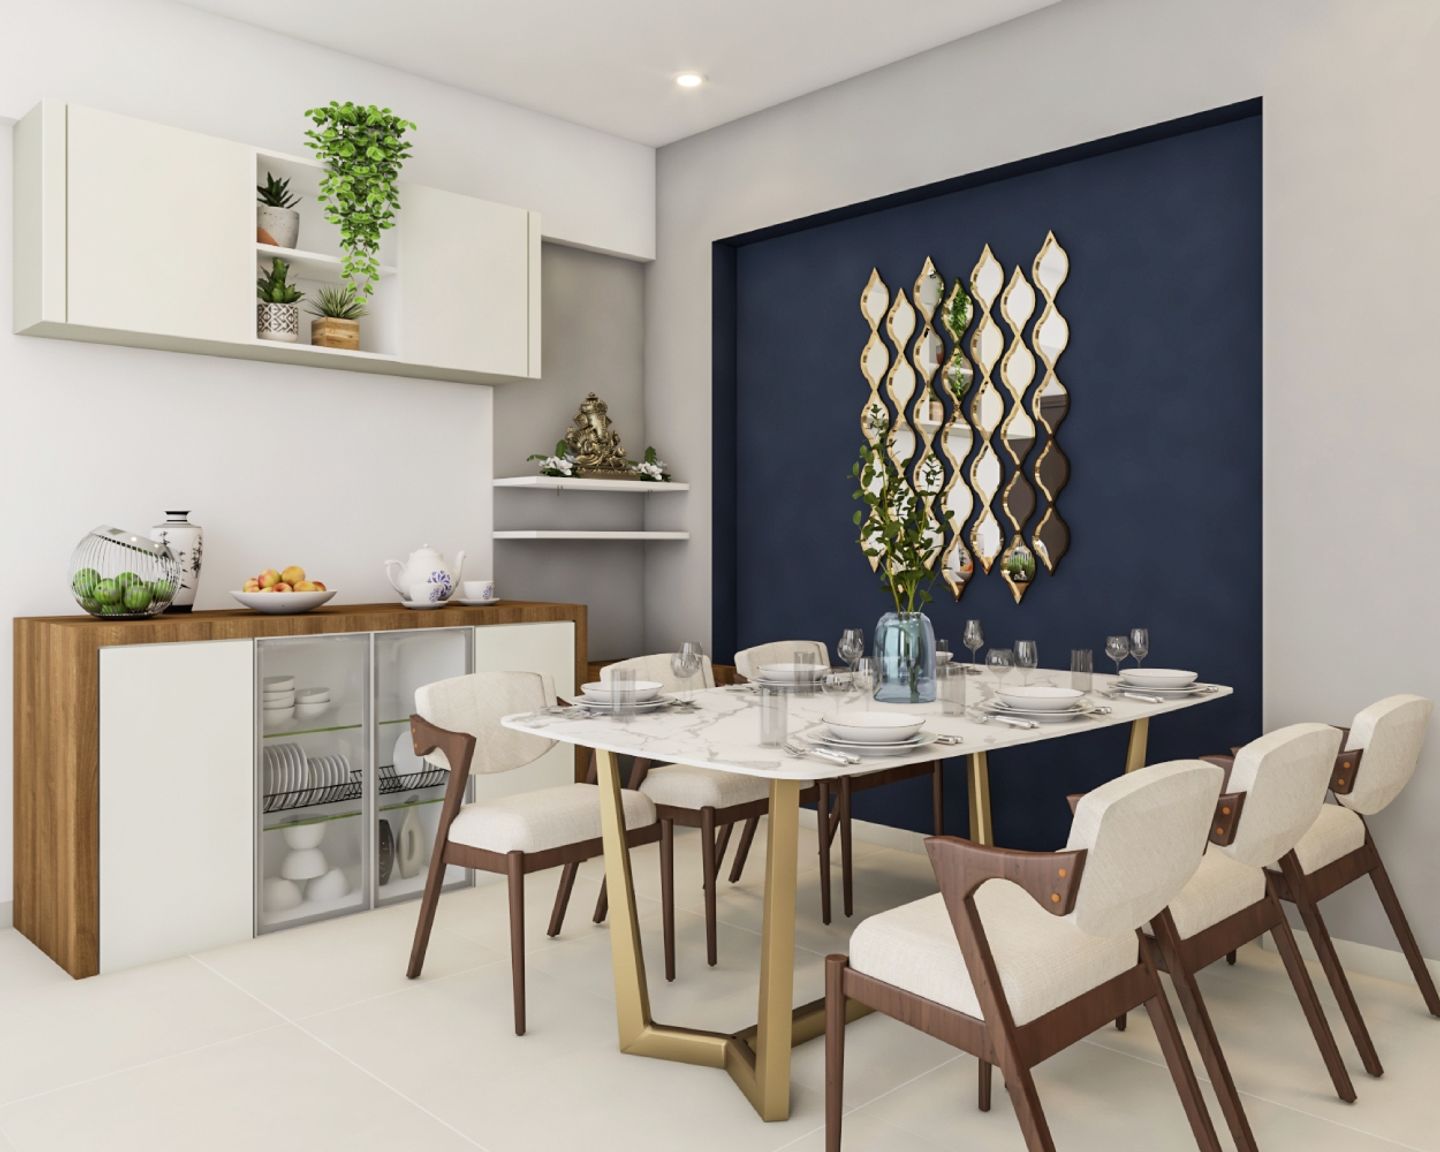 6-Seater White And Wood Dining Room Design With Dark Blue Accent Wall - Livspace